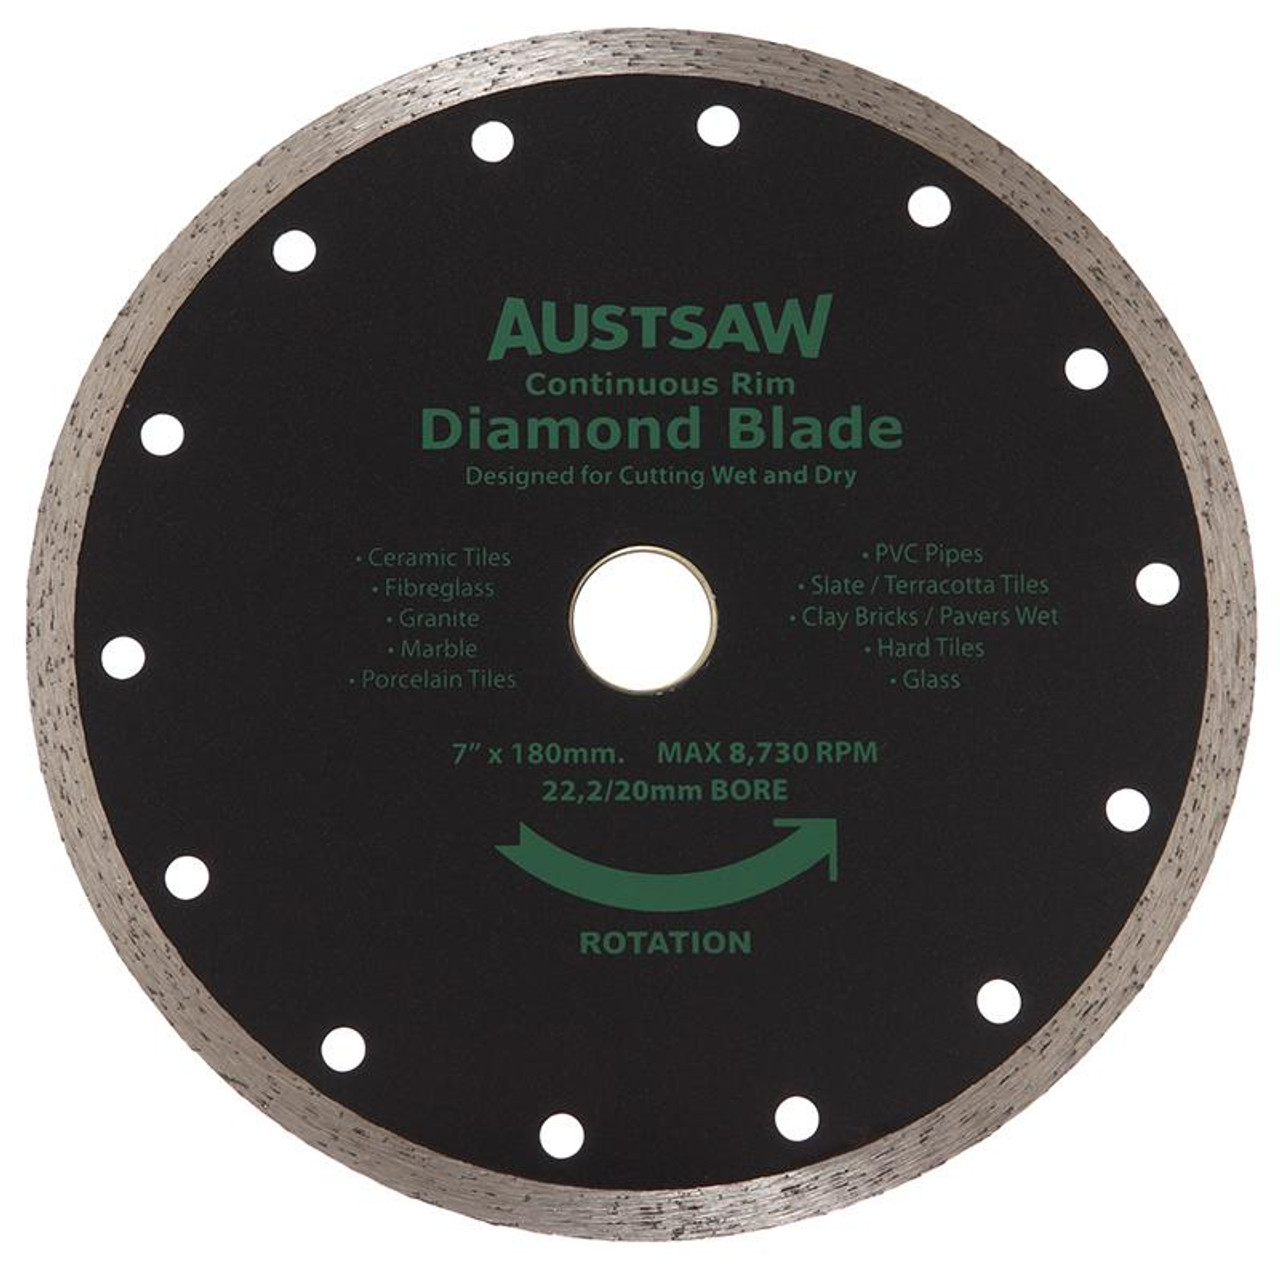 Austsaw - 185Mm(7In) Diamond Blade Continuous Rim - 22.2/20Mm Bore - Continuous